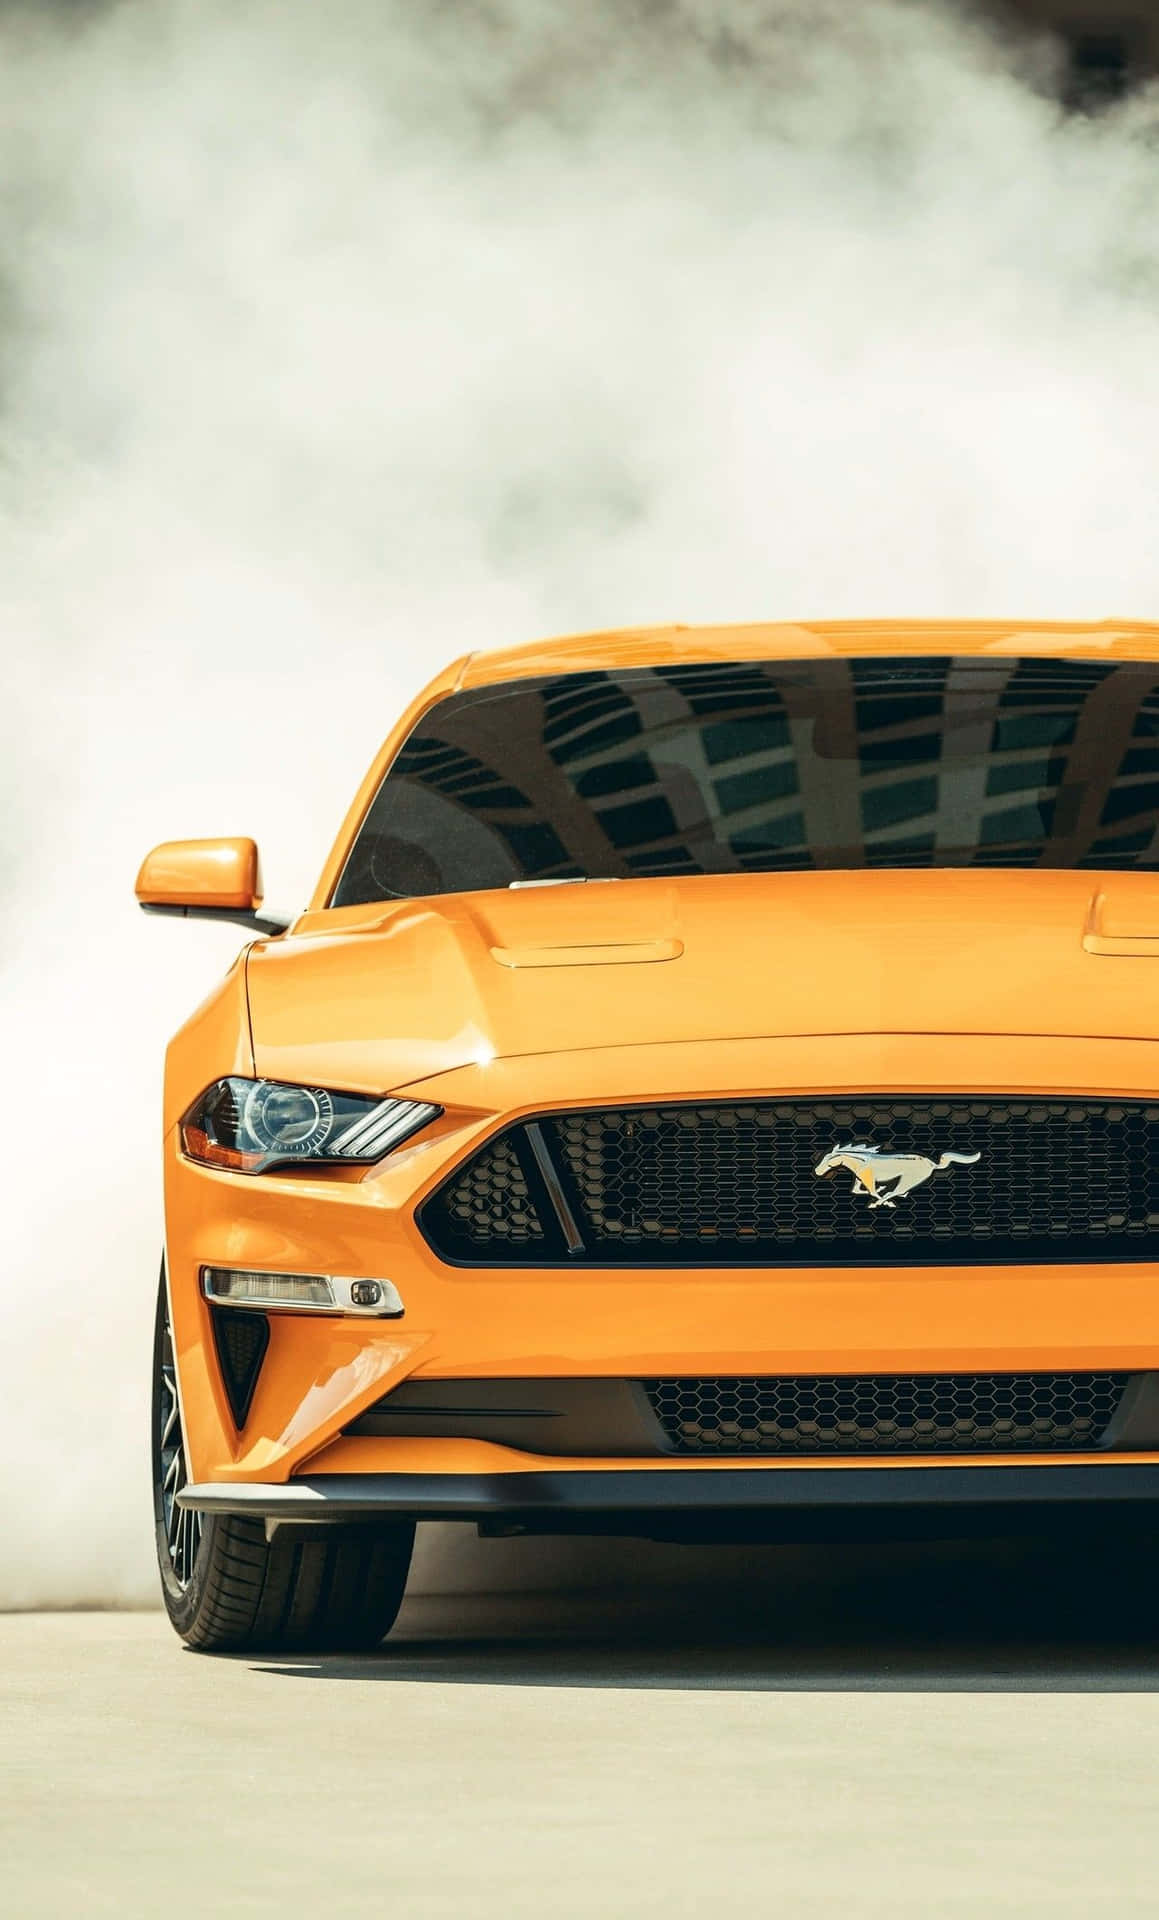 2019ford Mustang Under Burnout. Wallpaper